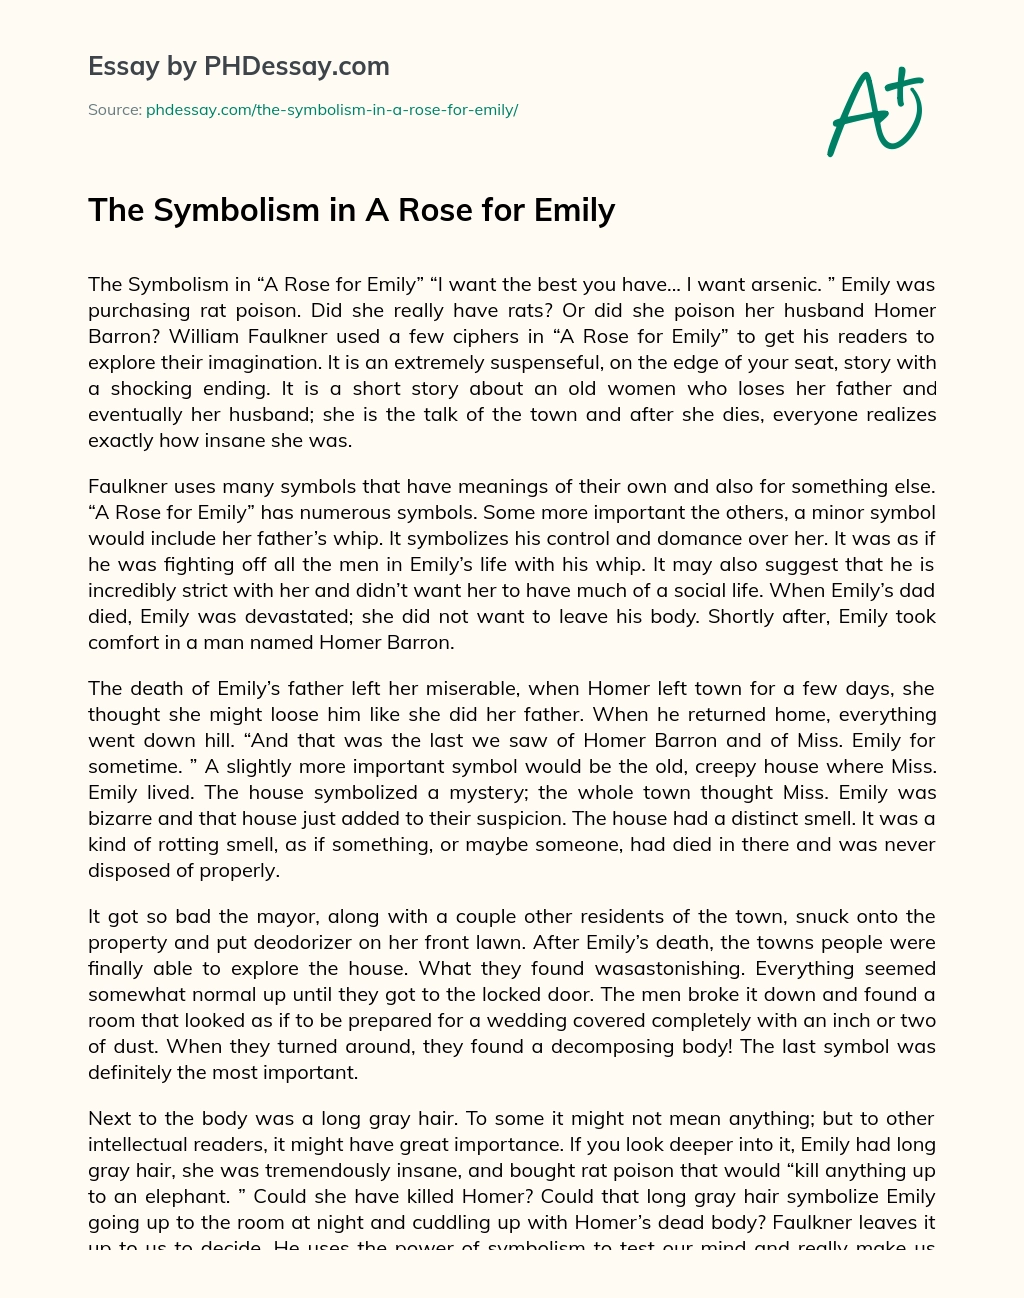 The Symbolism in A Rose for Emily essay